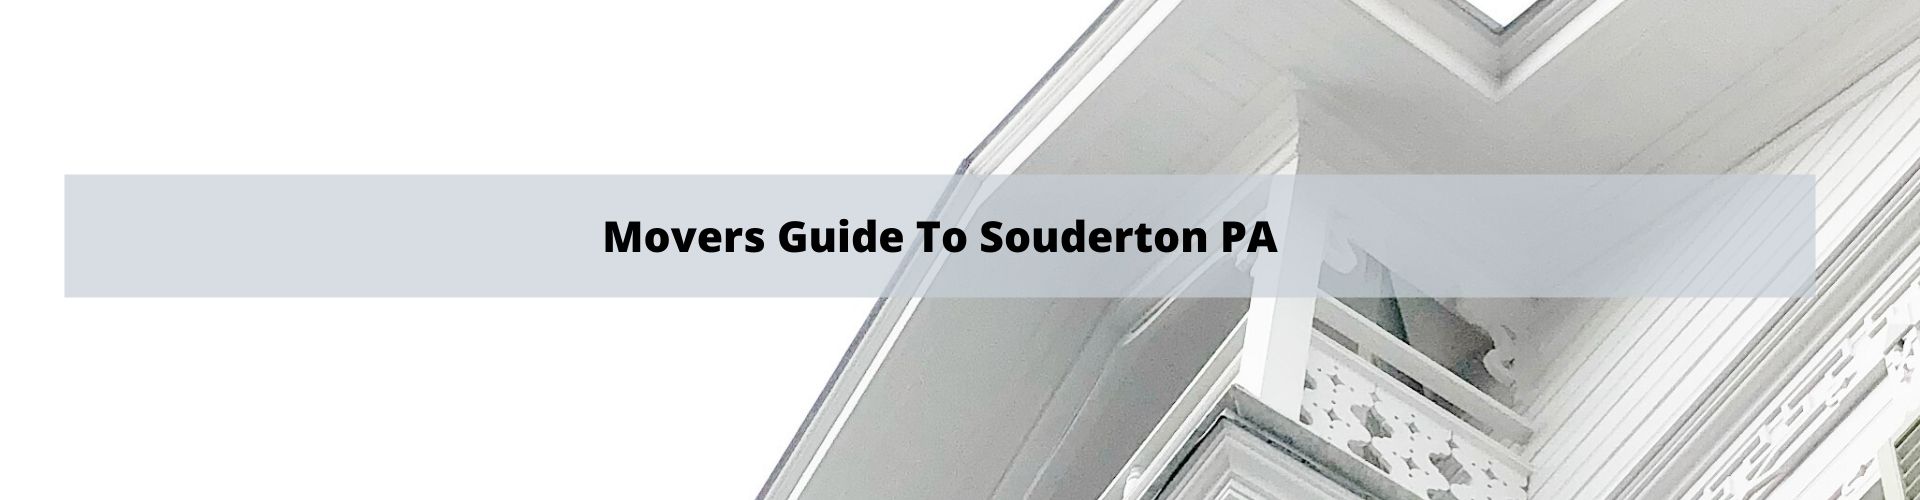 Mover's Guide to Souderton PA